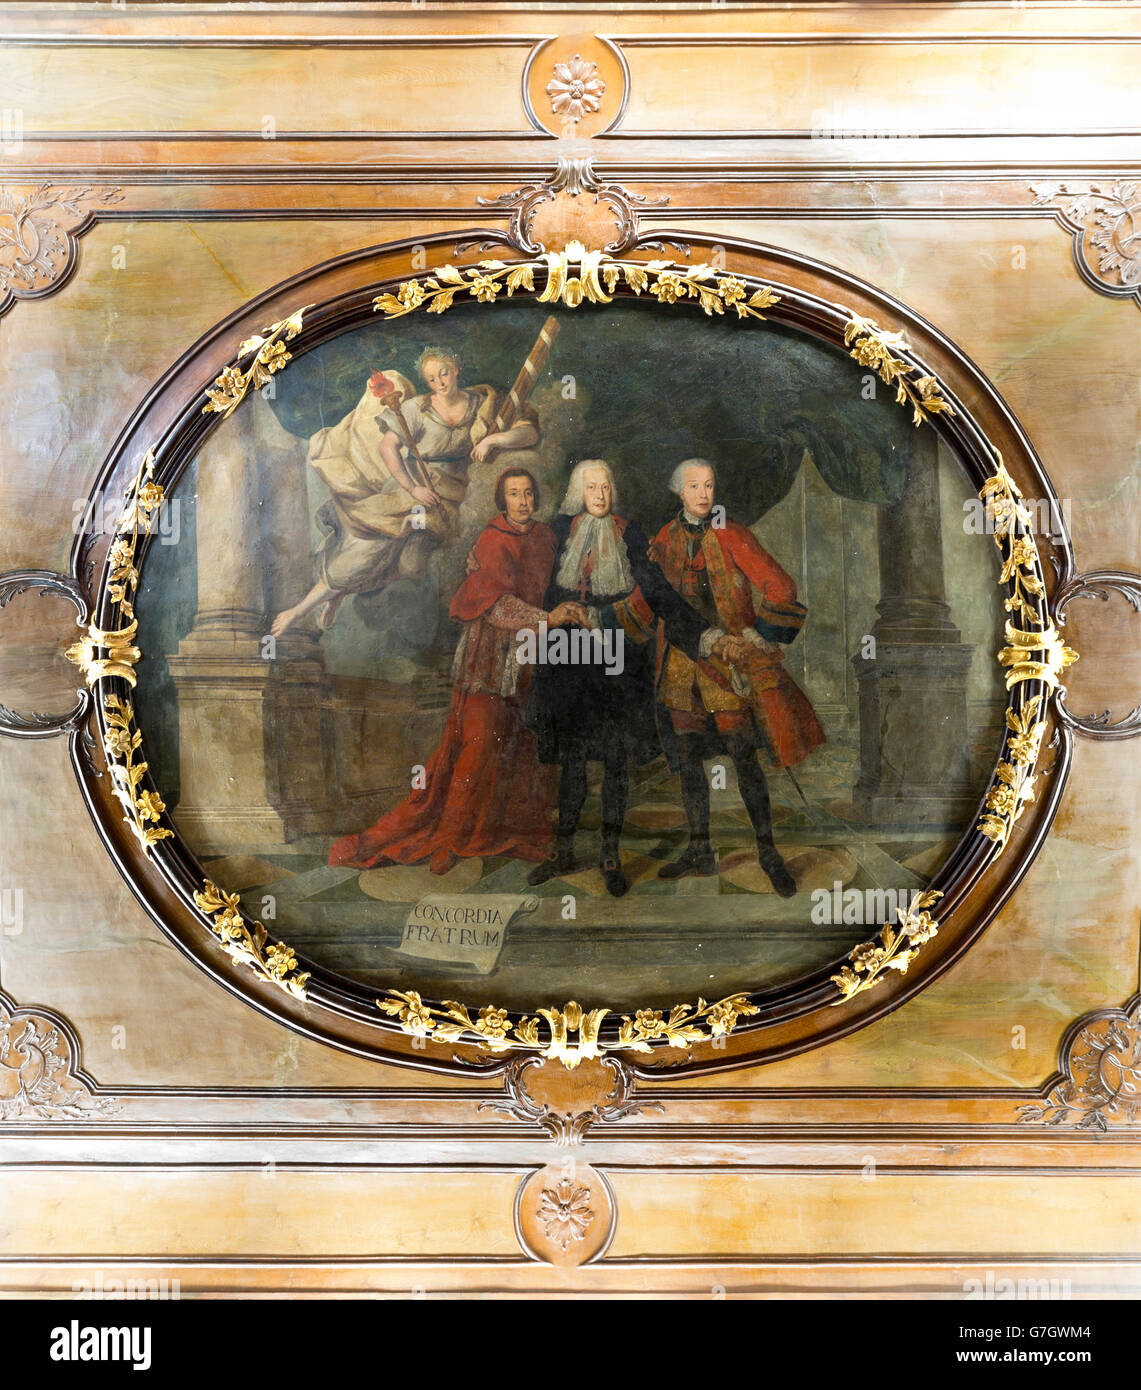 18th century painting on stucco (possibly by Joana do Salitre) depicting the Marquis of Pombal and his brothers in Palacio de Oe Stock Photo